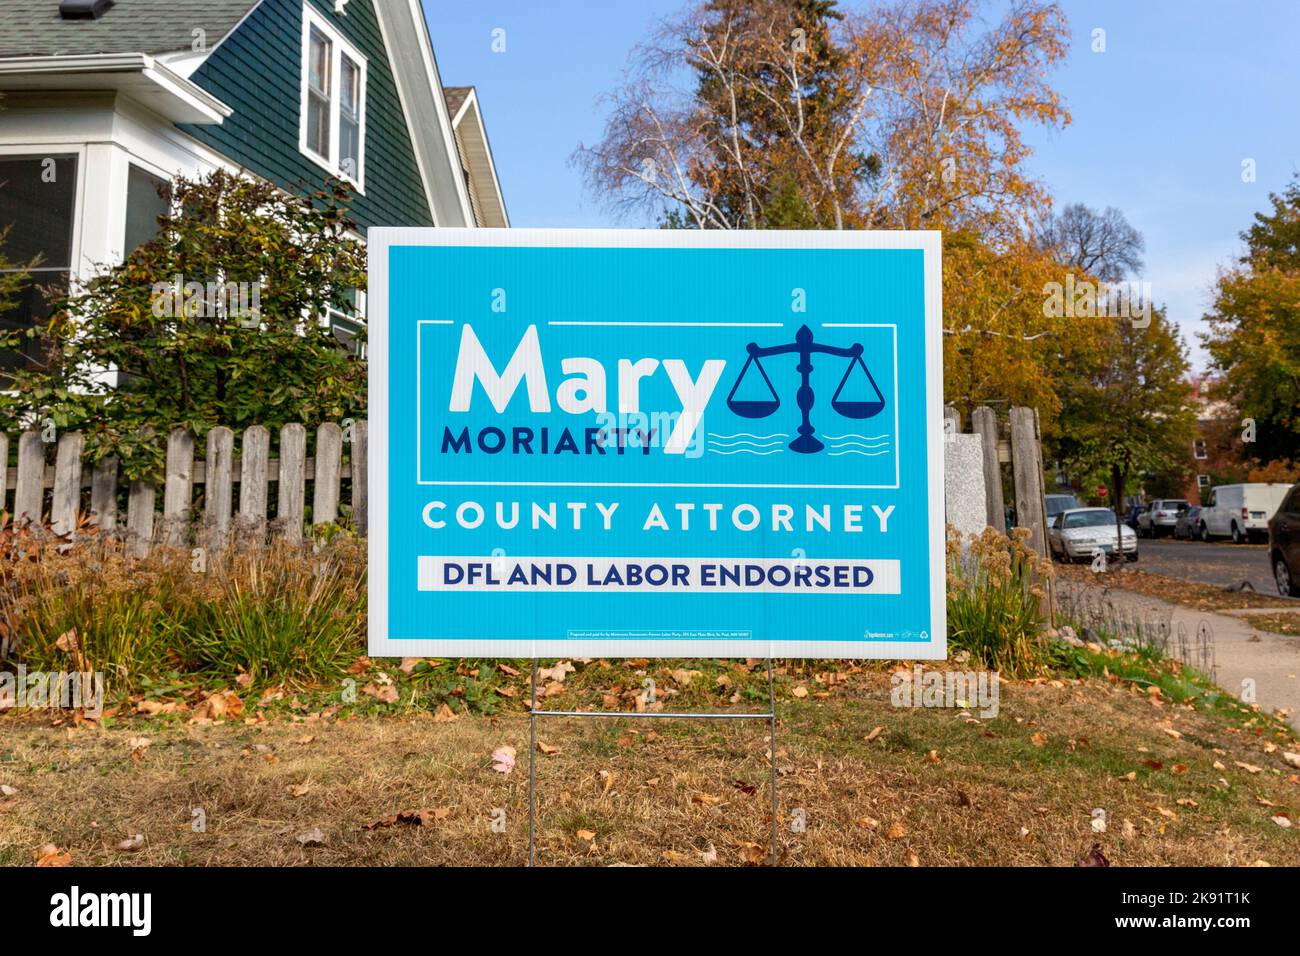 A Mary Moriarty DLF and Labor Endorsed yard sign for Hennepin County Attorney in Minneapolis, Minnesota Stock Photo